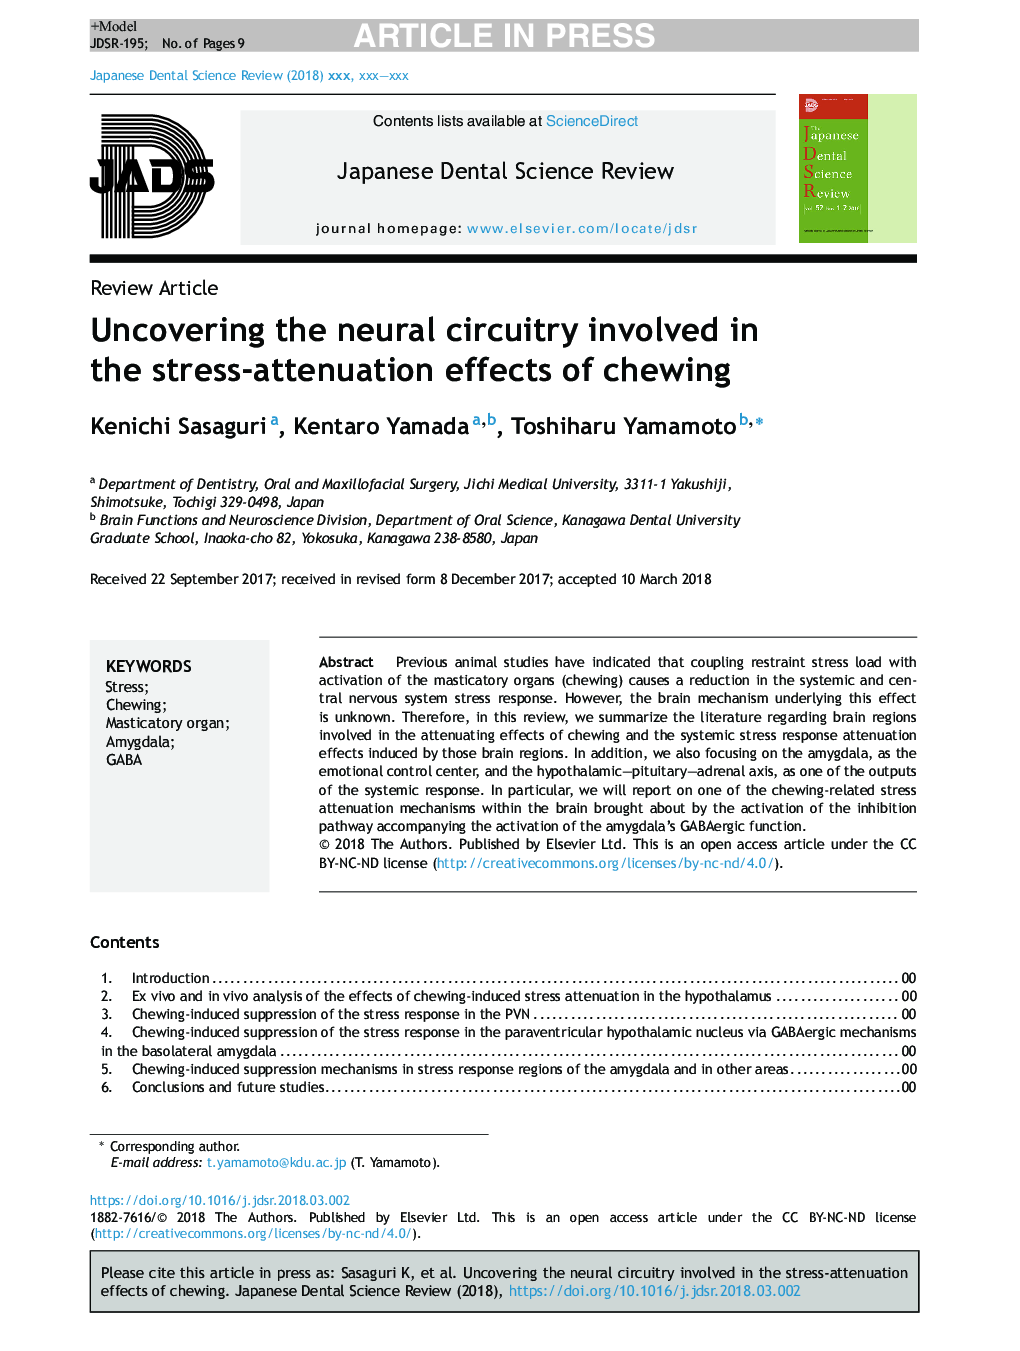 Uncovering the neural circuitry involved in the stress-attenuation effects of chewing